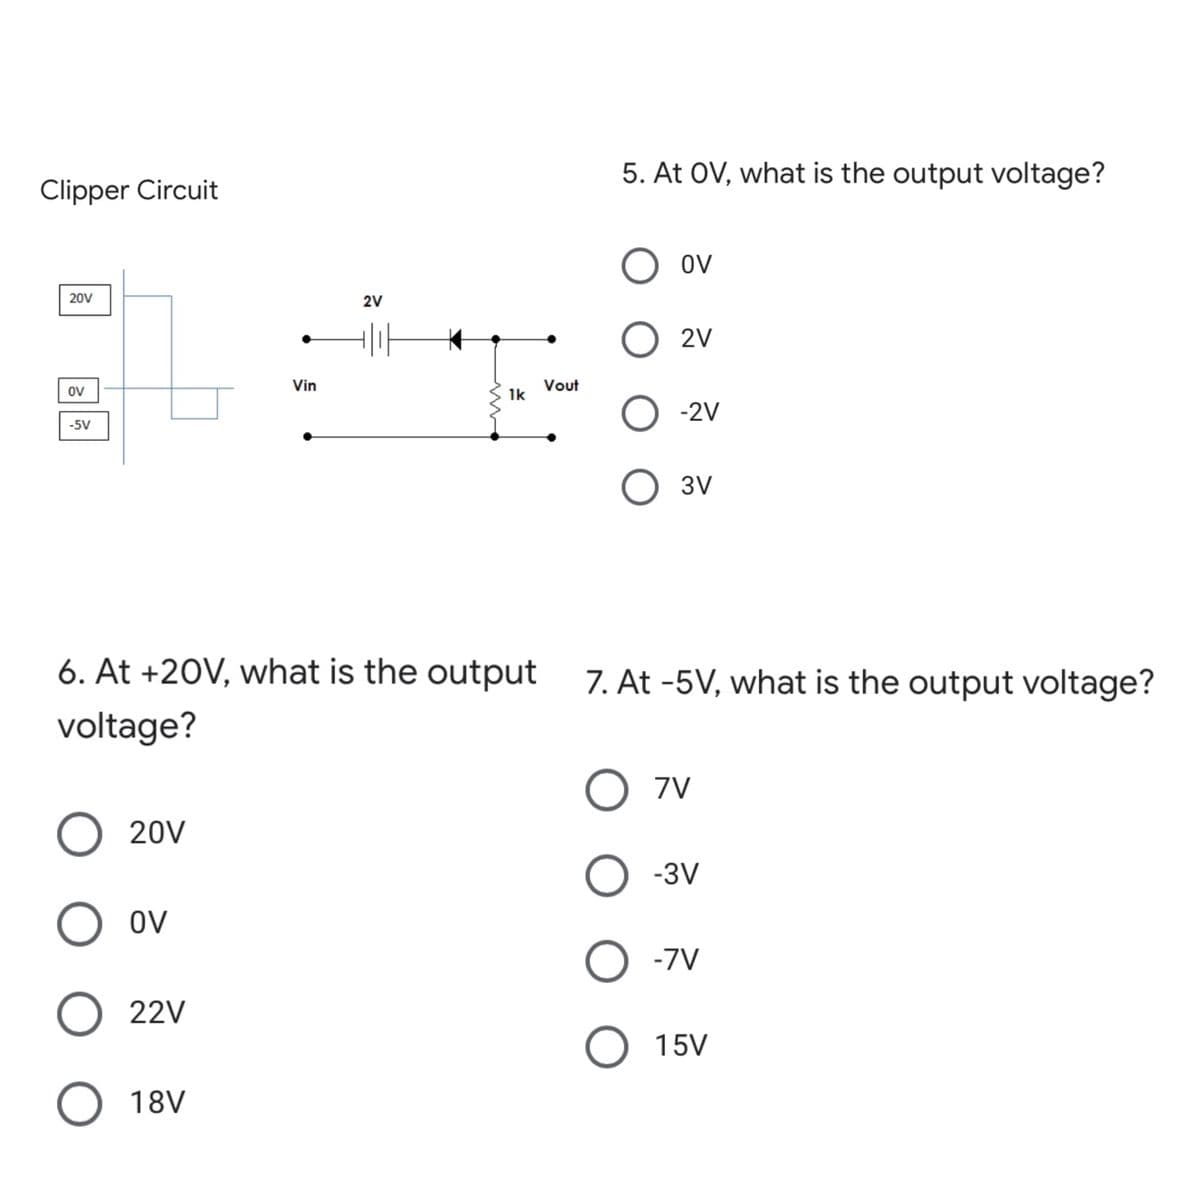 5. At OV, what is the output voltage?
Clipper Circuit
O ov
20V
2V
O 2V
Vin
Vout
1k
ov
O - 2v
-5V
3V
6. At +20V, what is the output
7. At -5V, what is the output voltage?
voltage?
O 7v
20V
О зу
OV
-7V
22V
O 15V
18V
ООО О
ООО О
